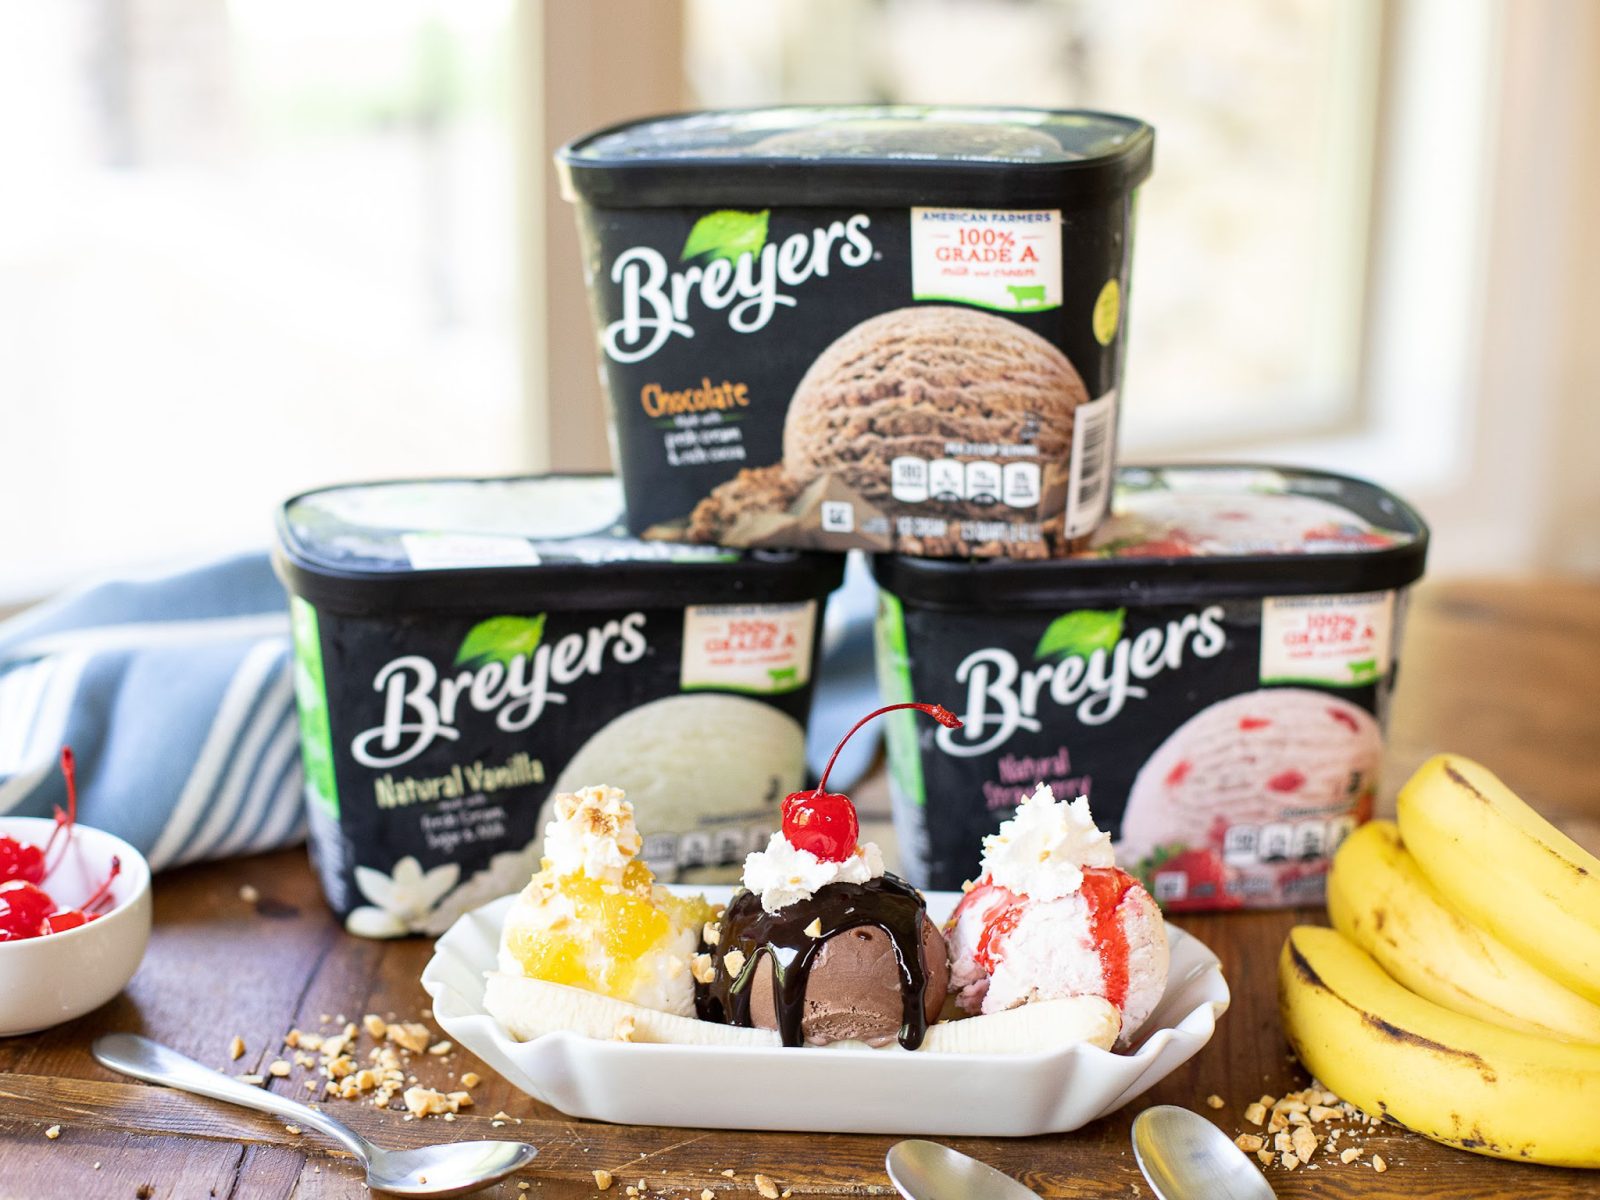 Stock Up On Delicious Breyers Ice Cream At Publix For Your Holiday Festivities – Buy One, Get One FREE!